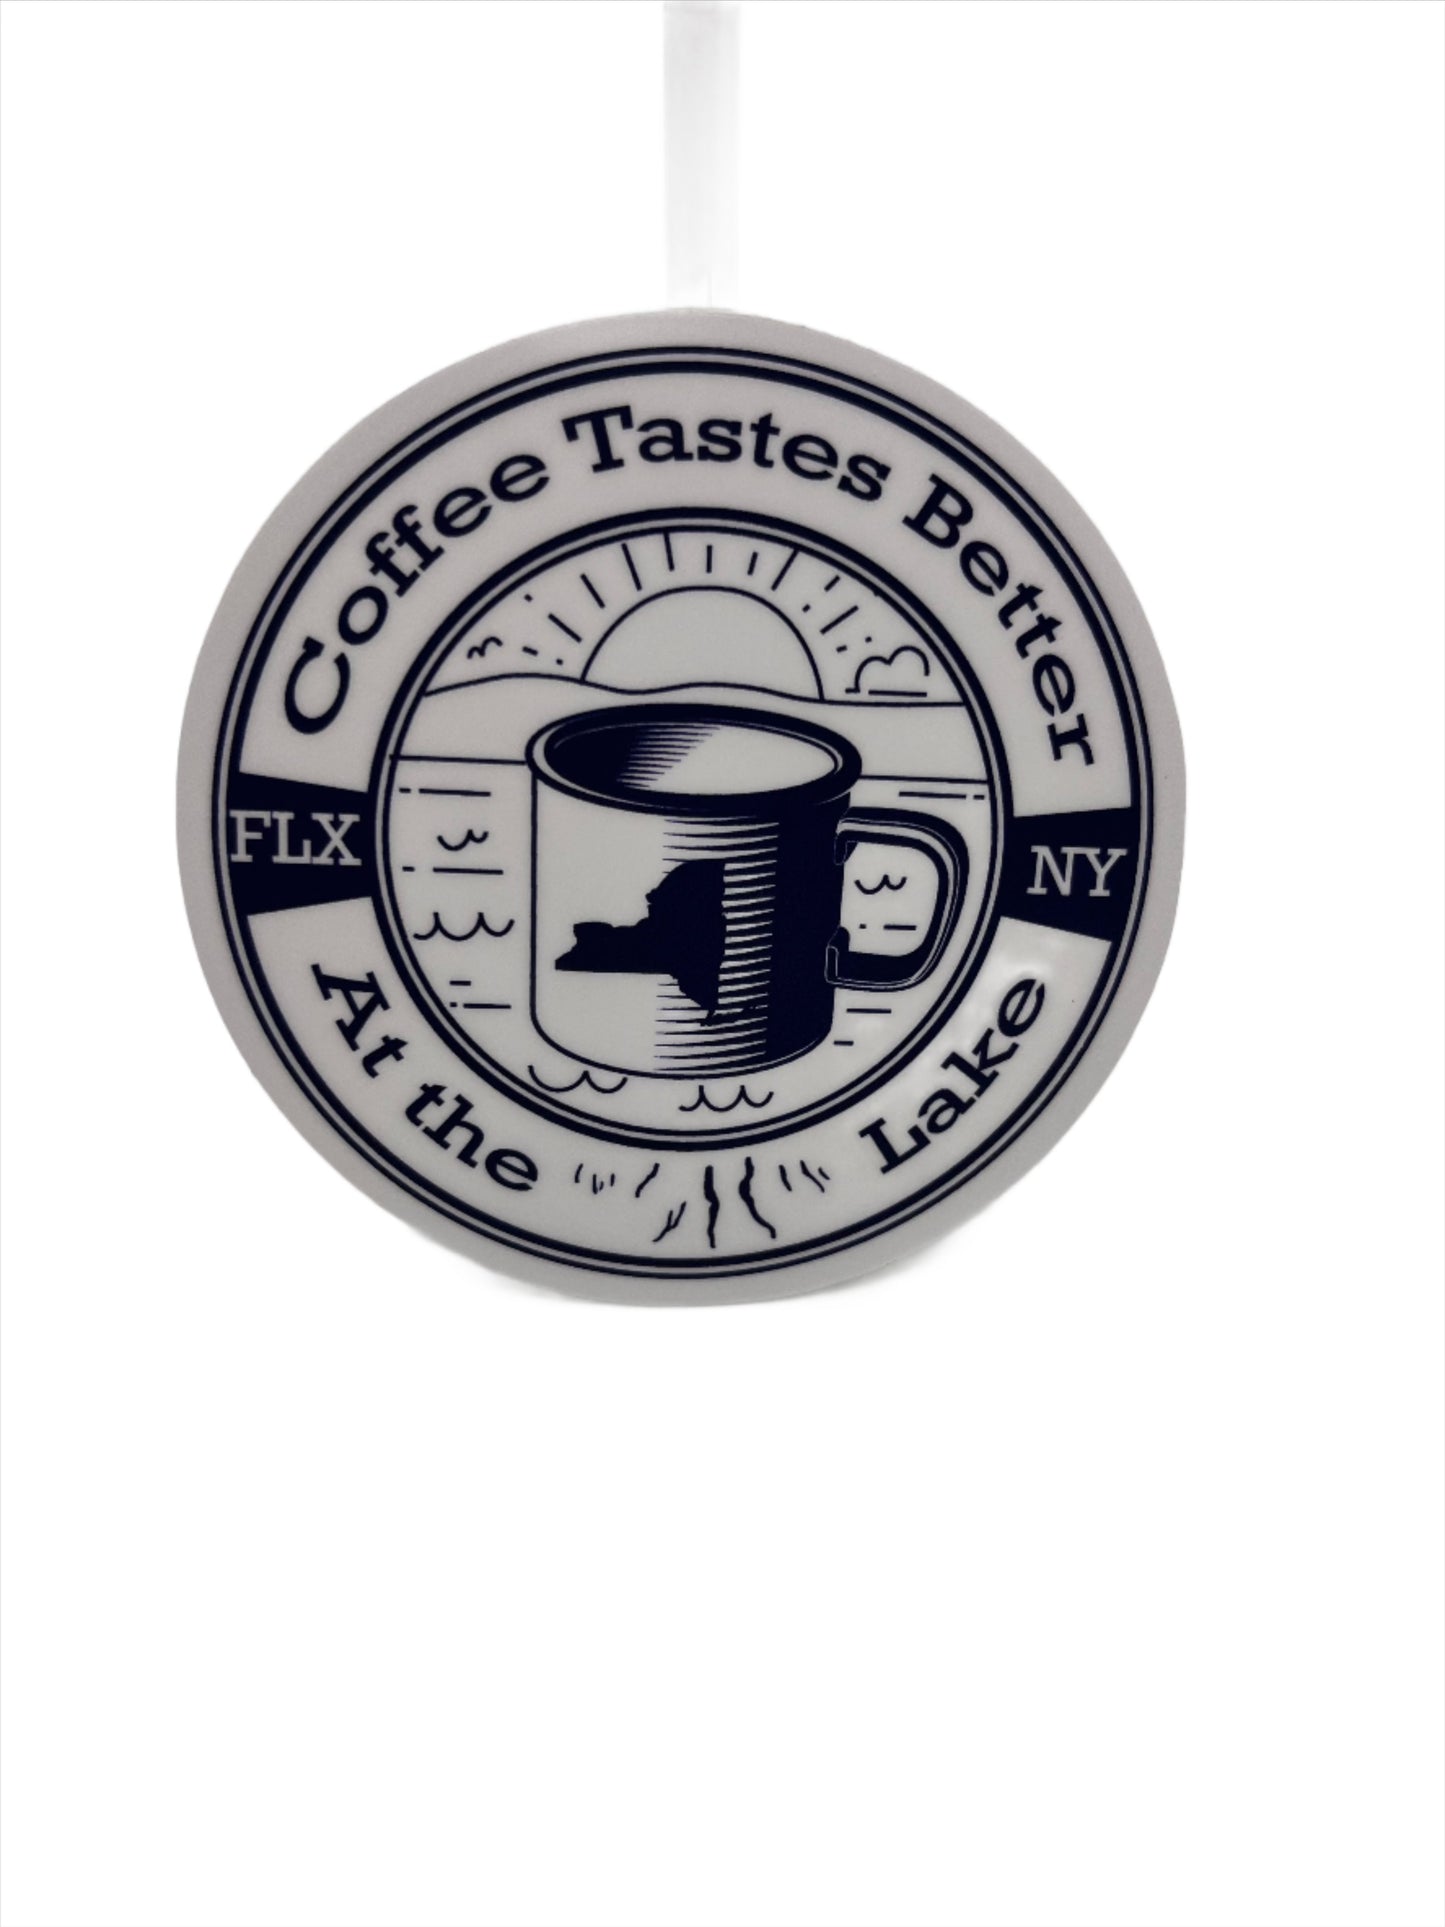 Coffee Taste Better at the Lake Sticker